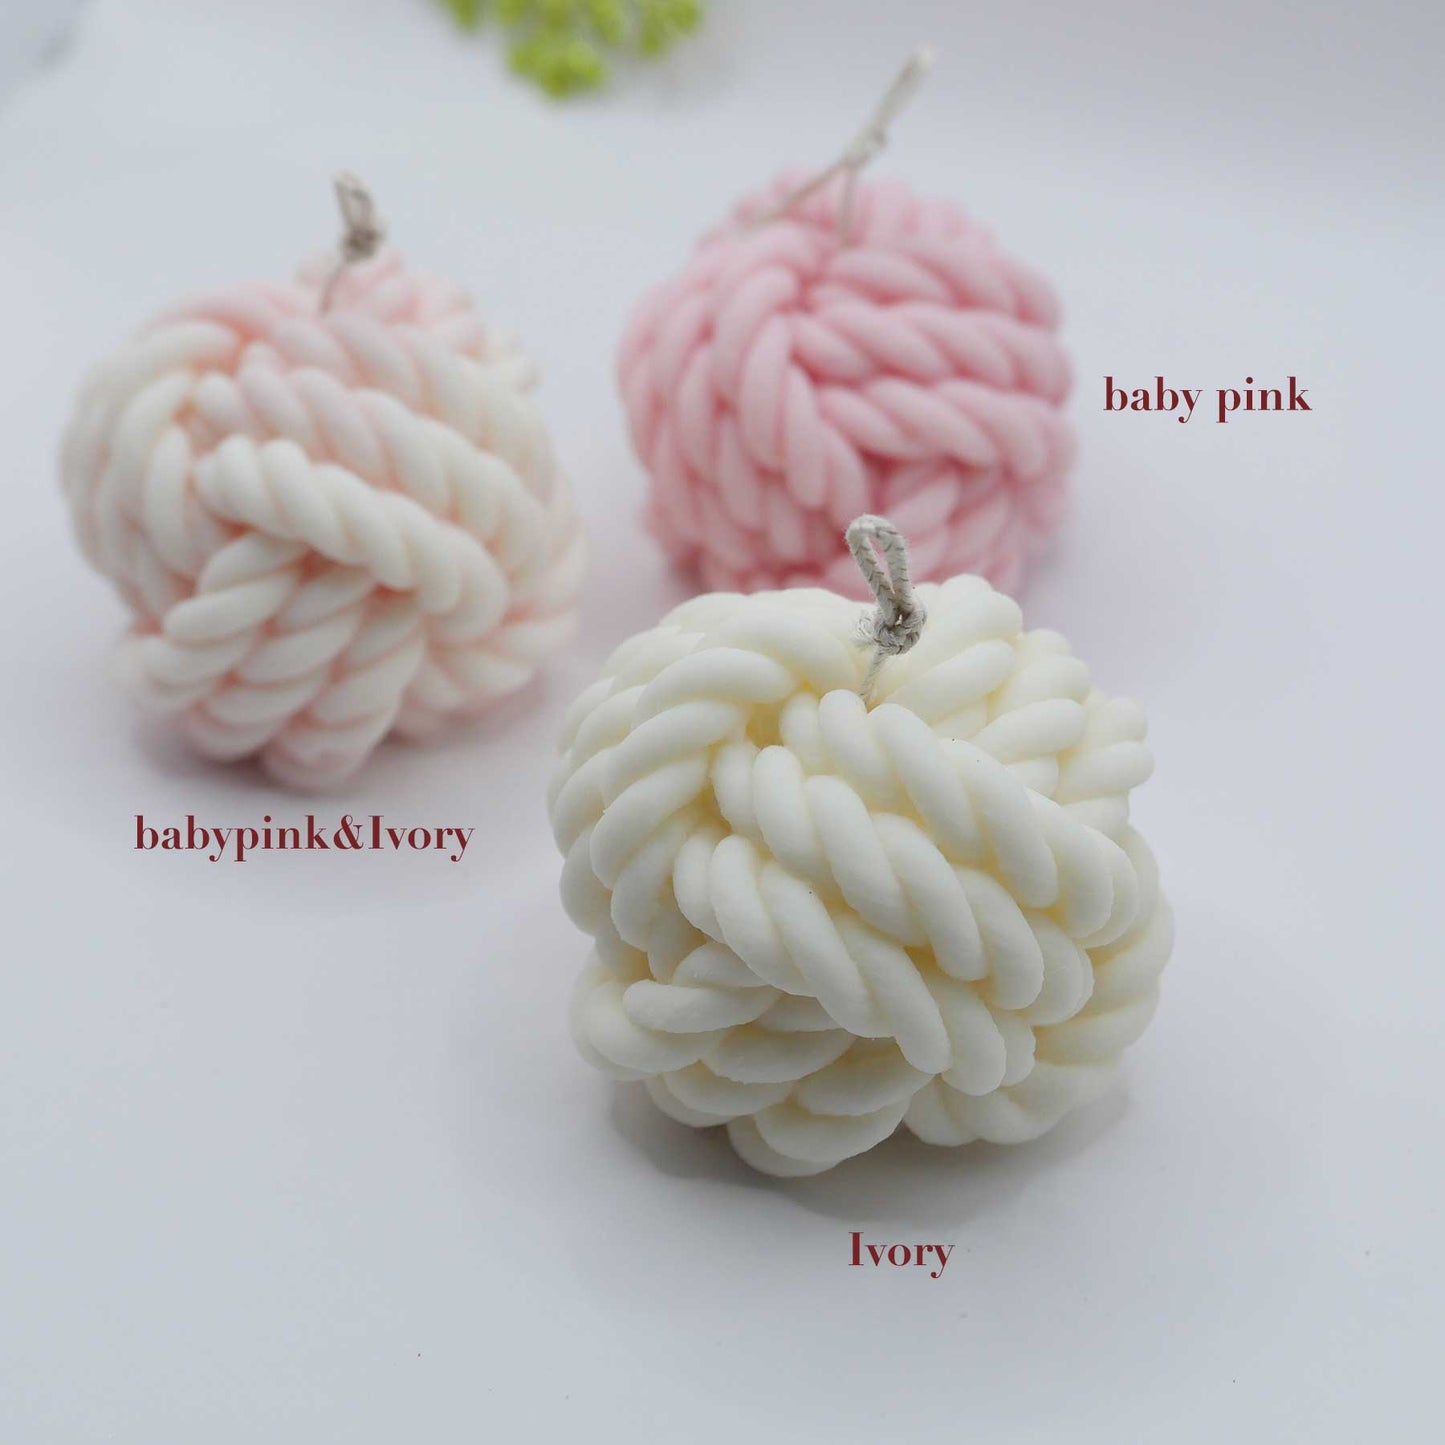 Scented Wool Candle baby pink & Ivory Mix